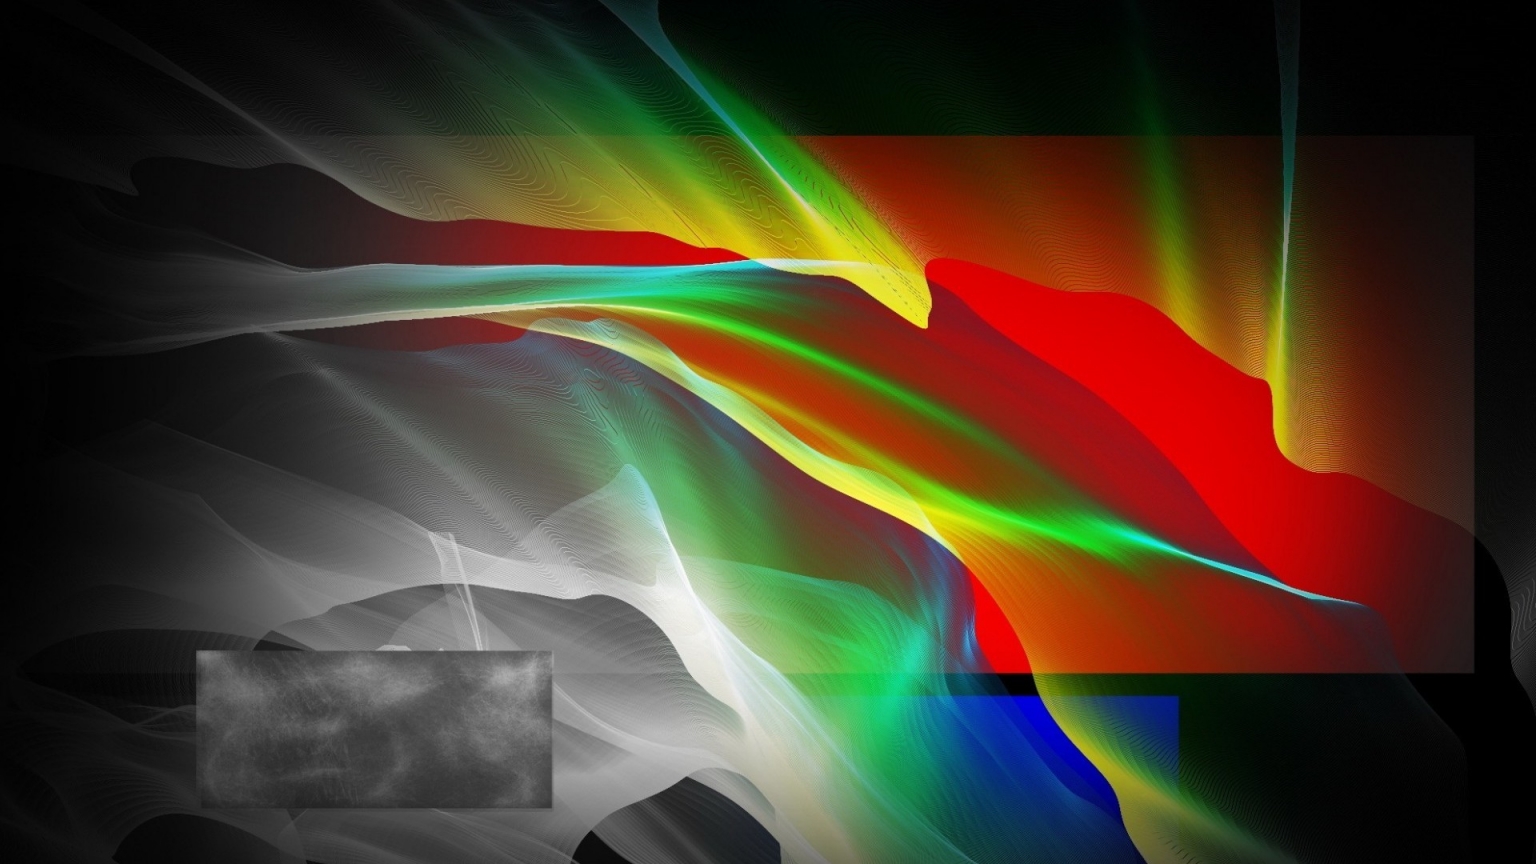 Abstract Shapes for 1536 x 864 HDTV resolution